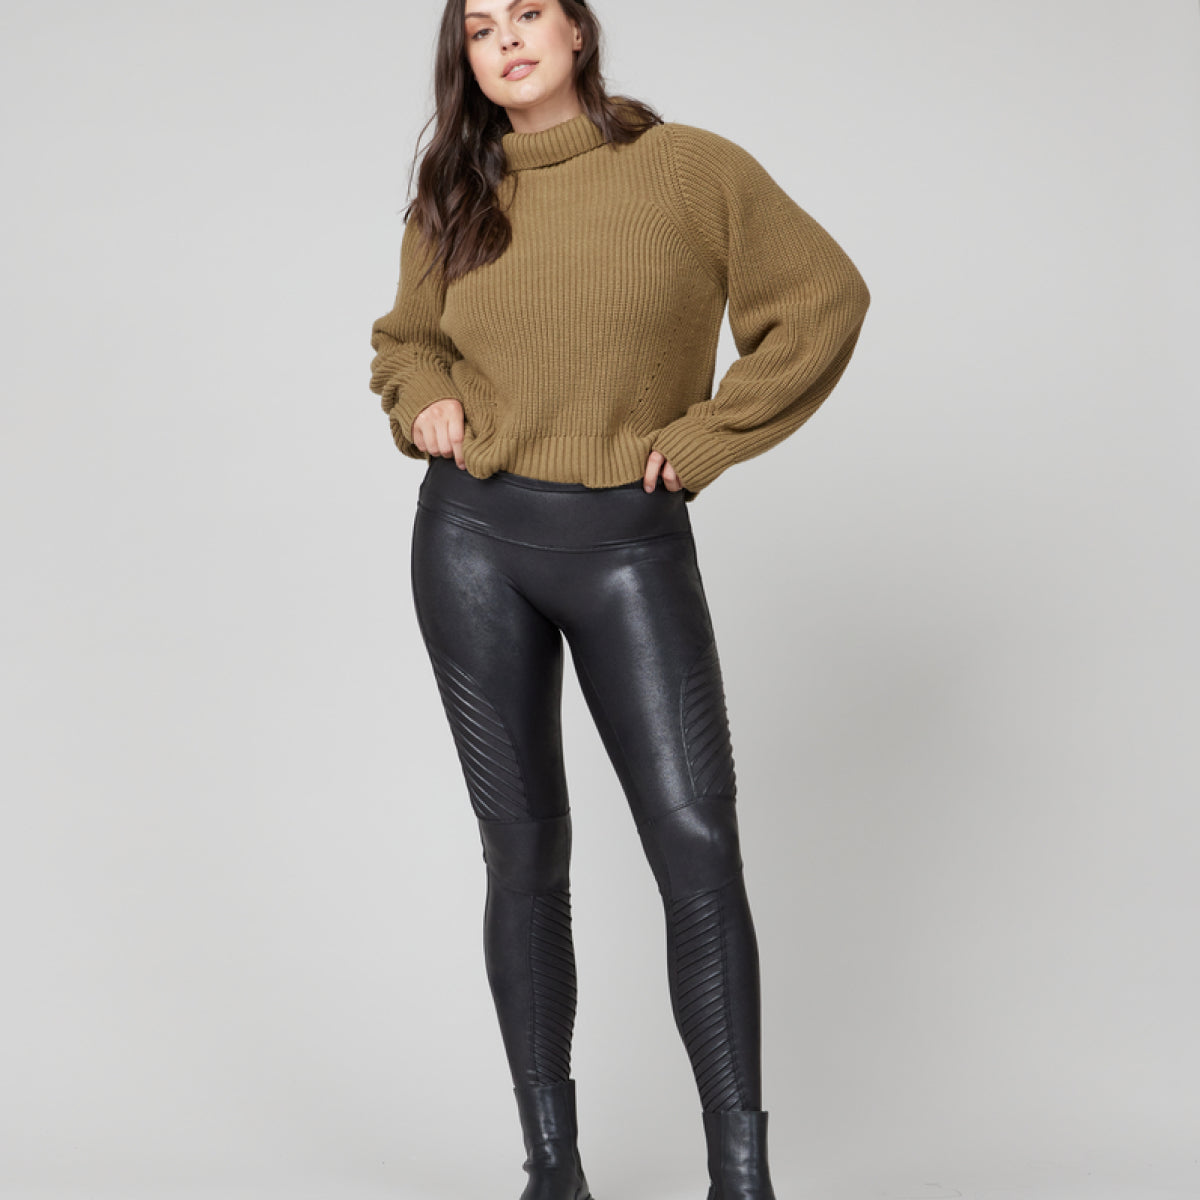 Spanx NWT Black Faux Leather Leggings Small - $85 New With